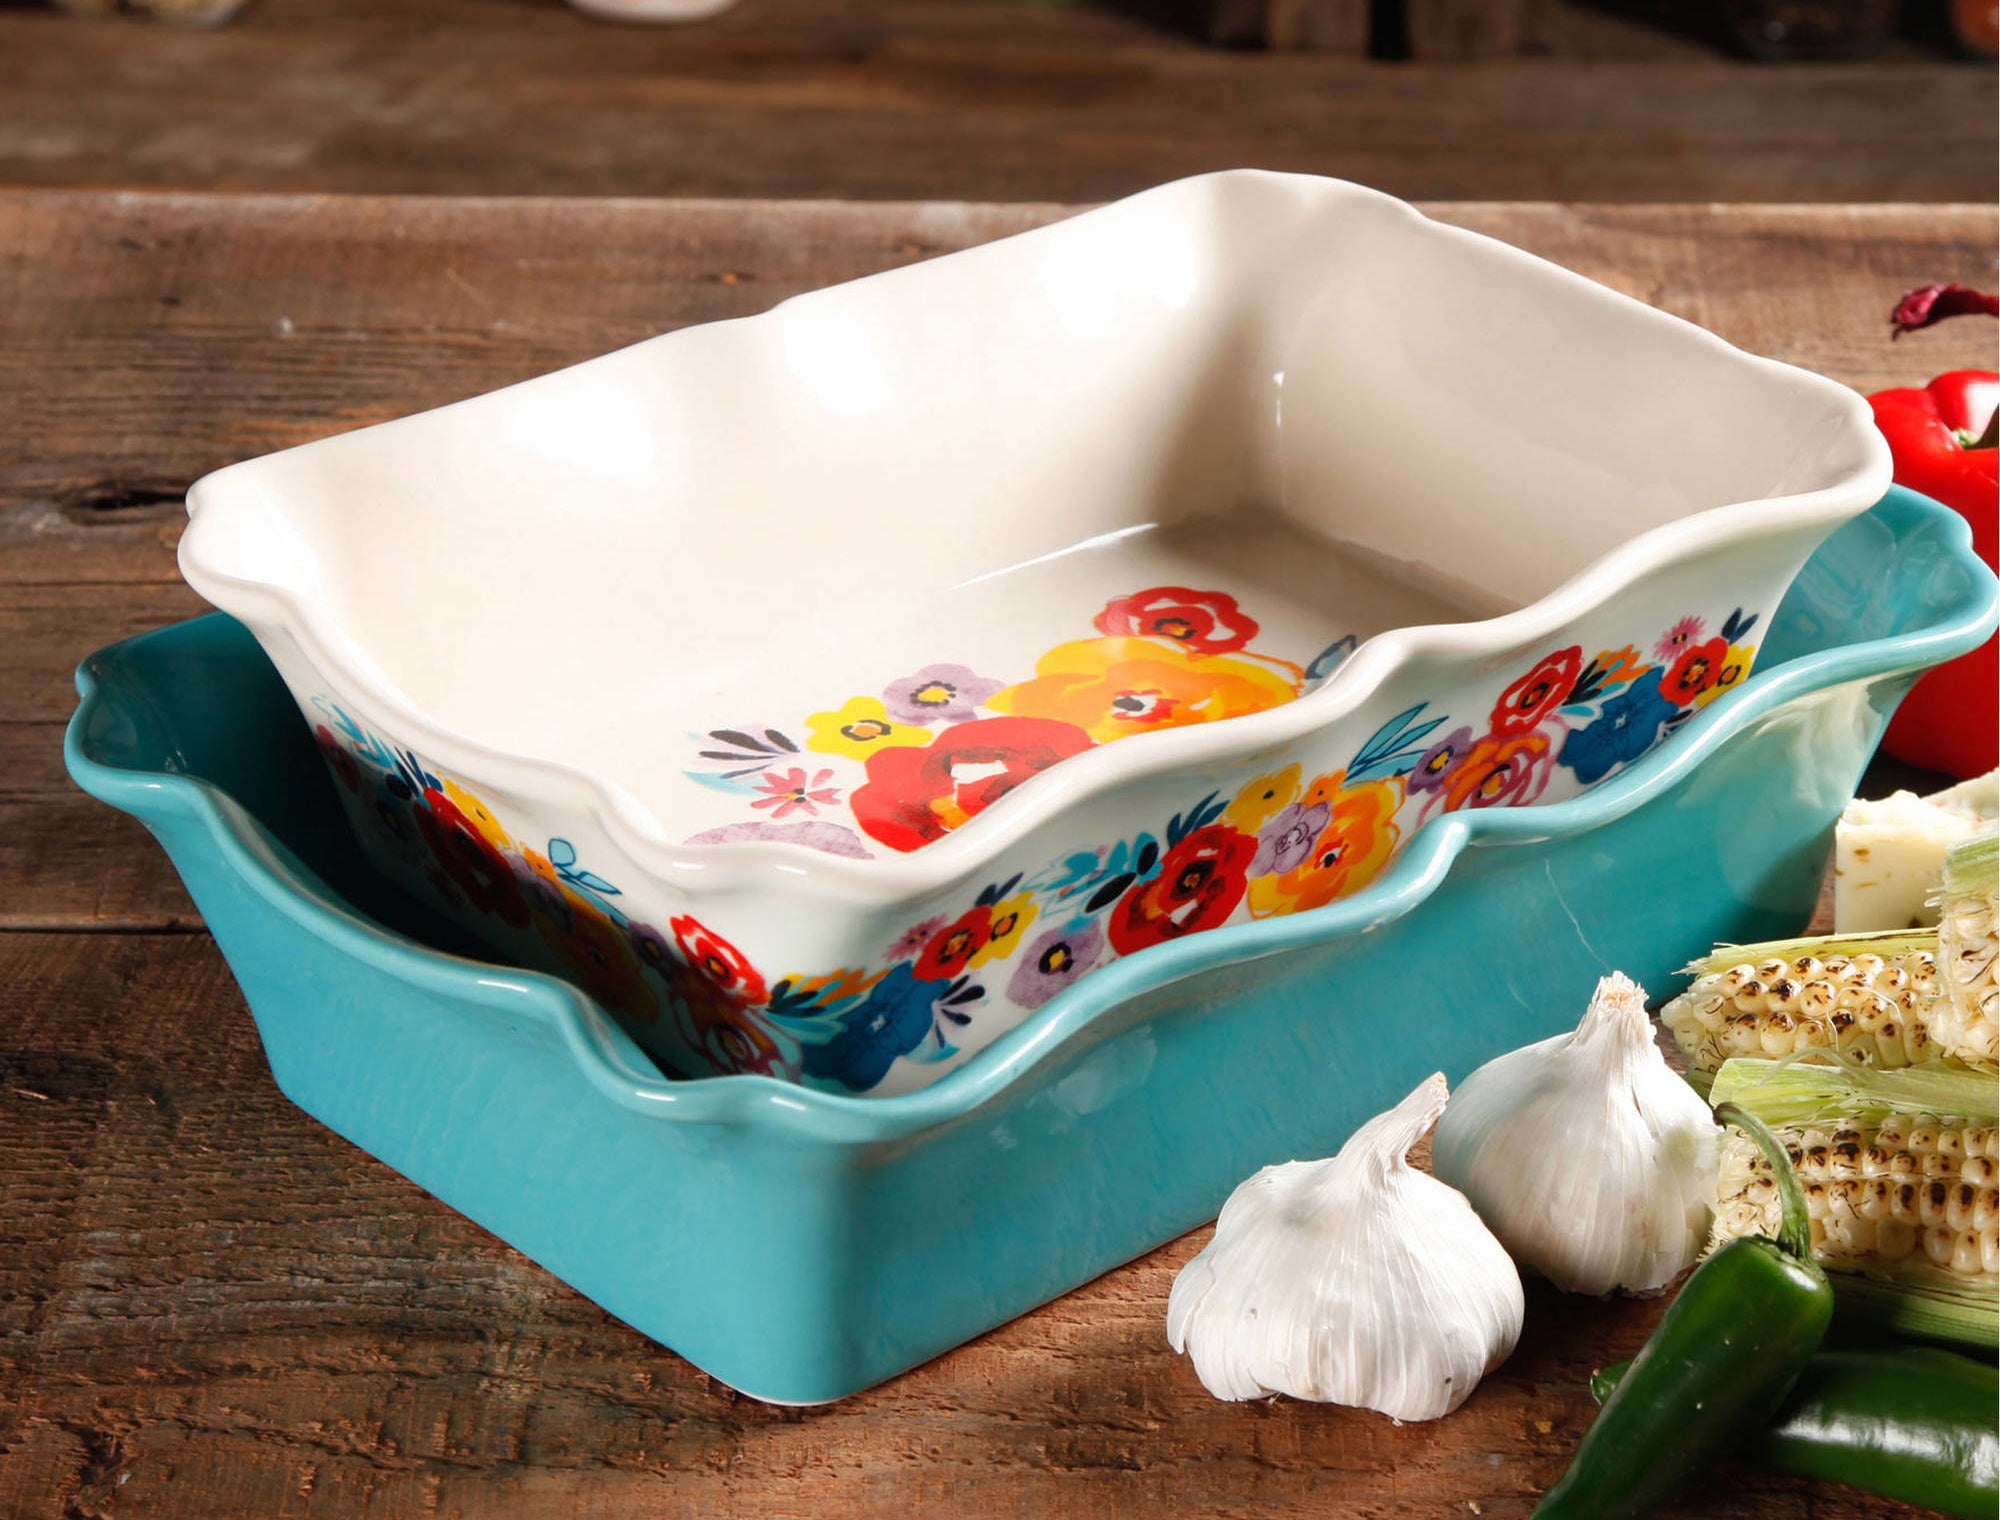 The bakeware set with one pan in a teal color, and the other is white with a colorful floral print